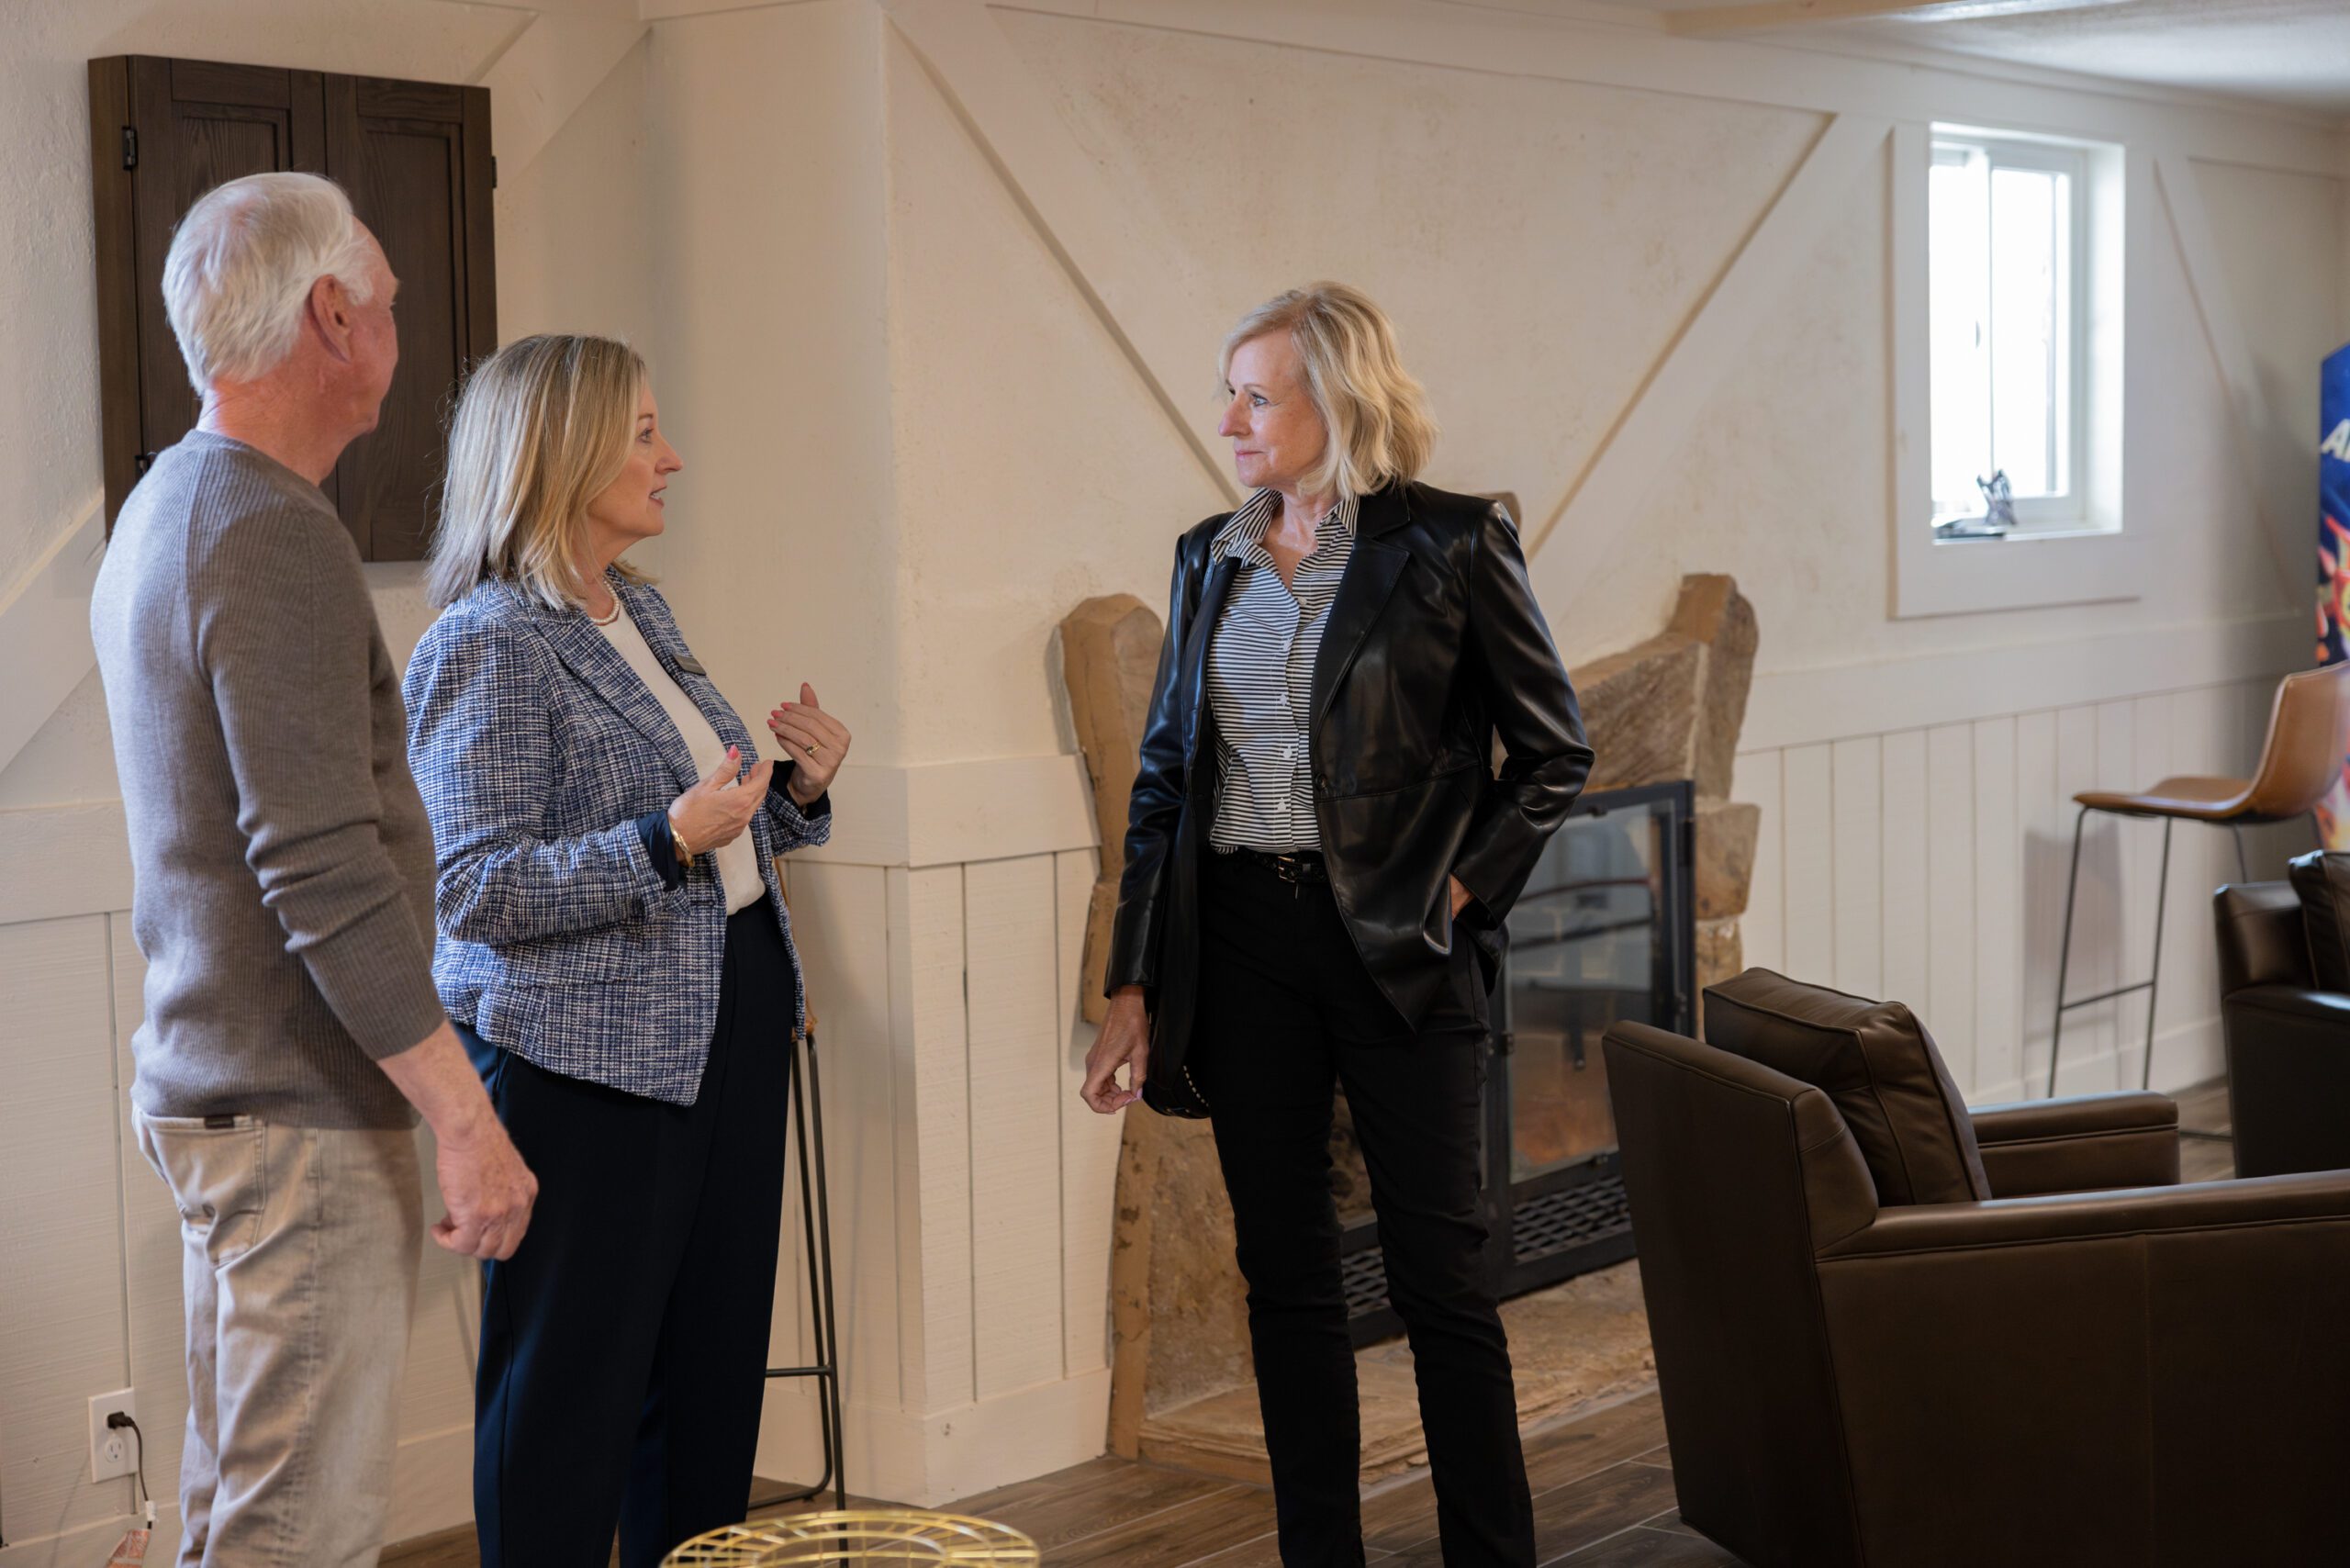 Julia Kirkendall talking with guest at Designer Spotlight event in 1930s home renovation in Tulsa OK by Kirkendall Design, full service interior design firm